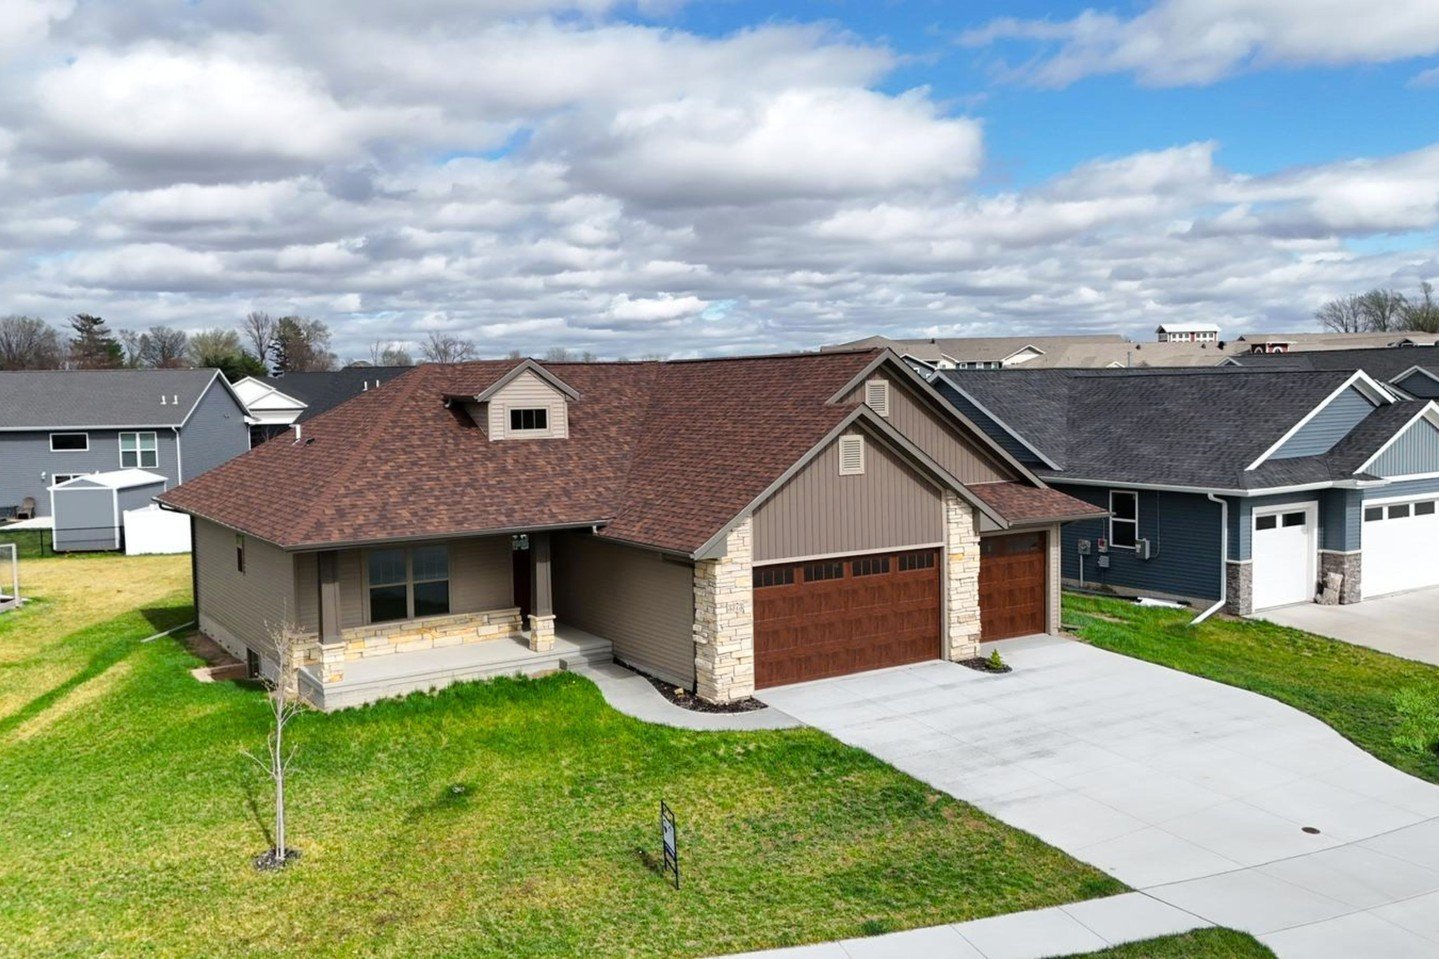 FOR SALE in Marion, Iowa! 🏠
🗓️ 4-26-2024
📫 Located at 3373 Carriage Court, Marion
💰 $439,950
🛏️ 3 Bedrooms
🛁 2 Baths
🚗 3 Car Attached Garage
🆕 New Construction
📍 Positioned in the serene embrace of a quiet Marion cul-de-sac.
✨ This radiant n